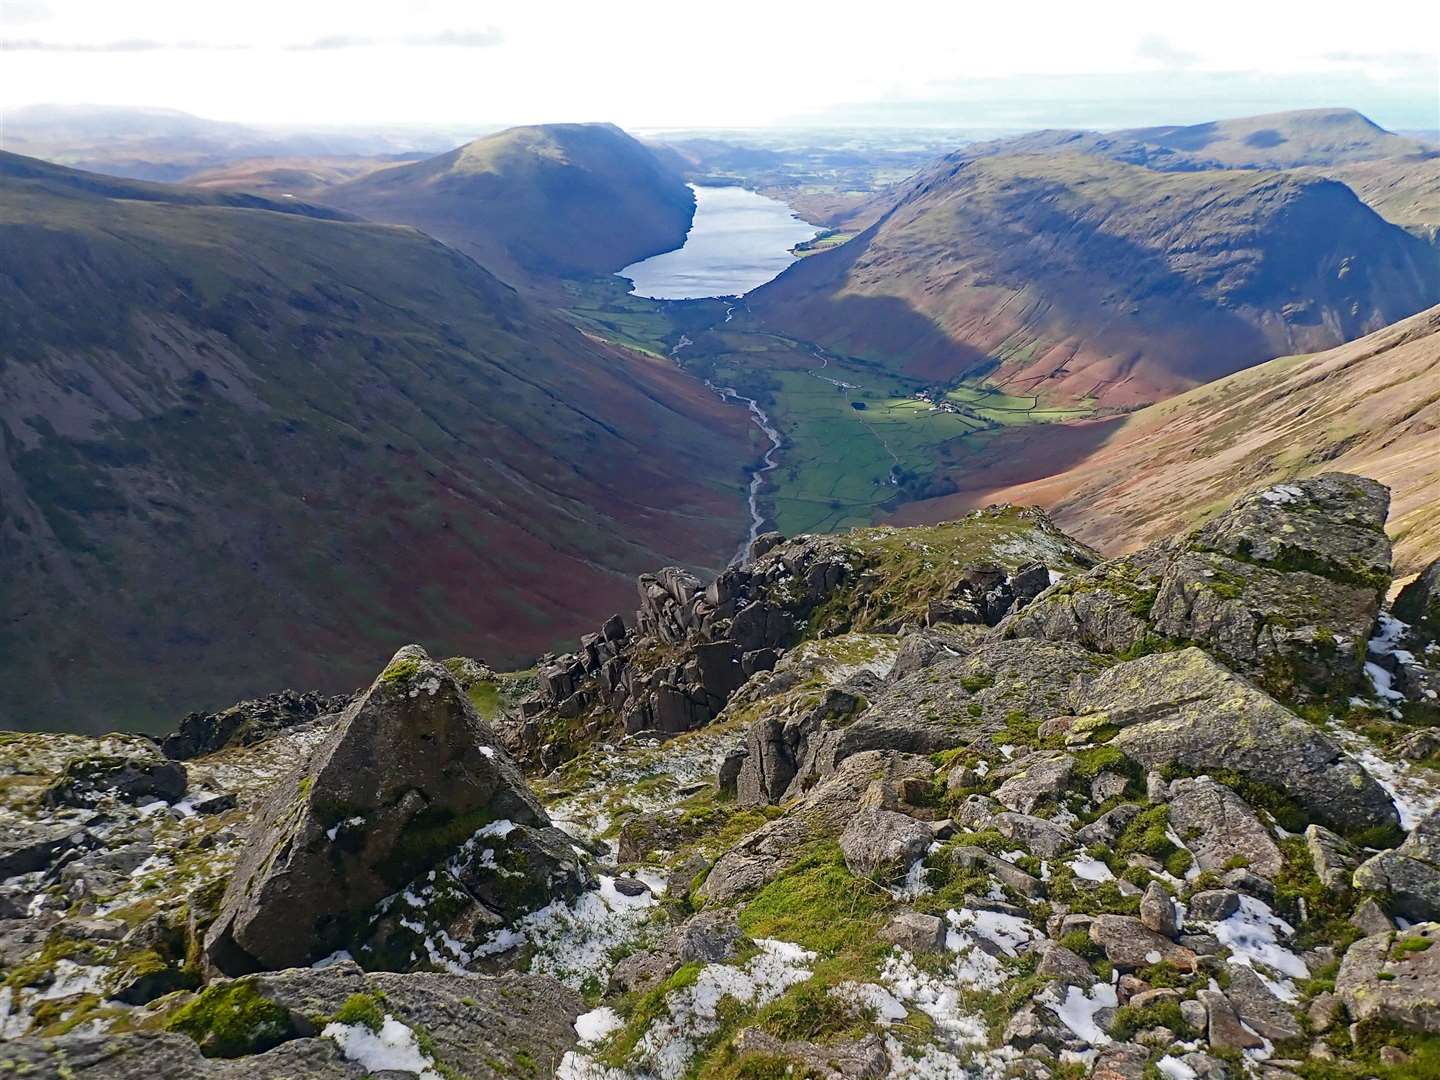 The view towards Wastwater.